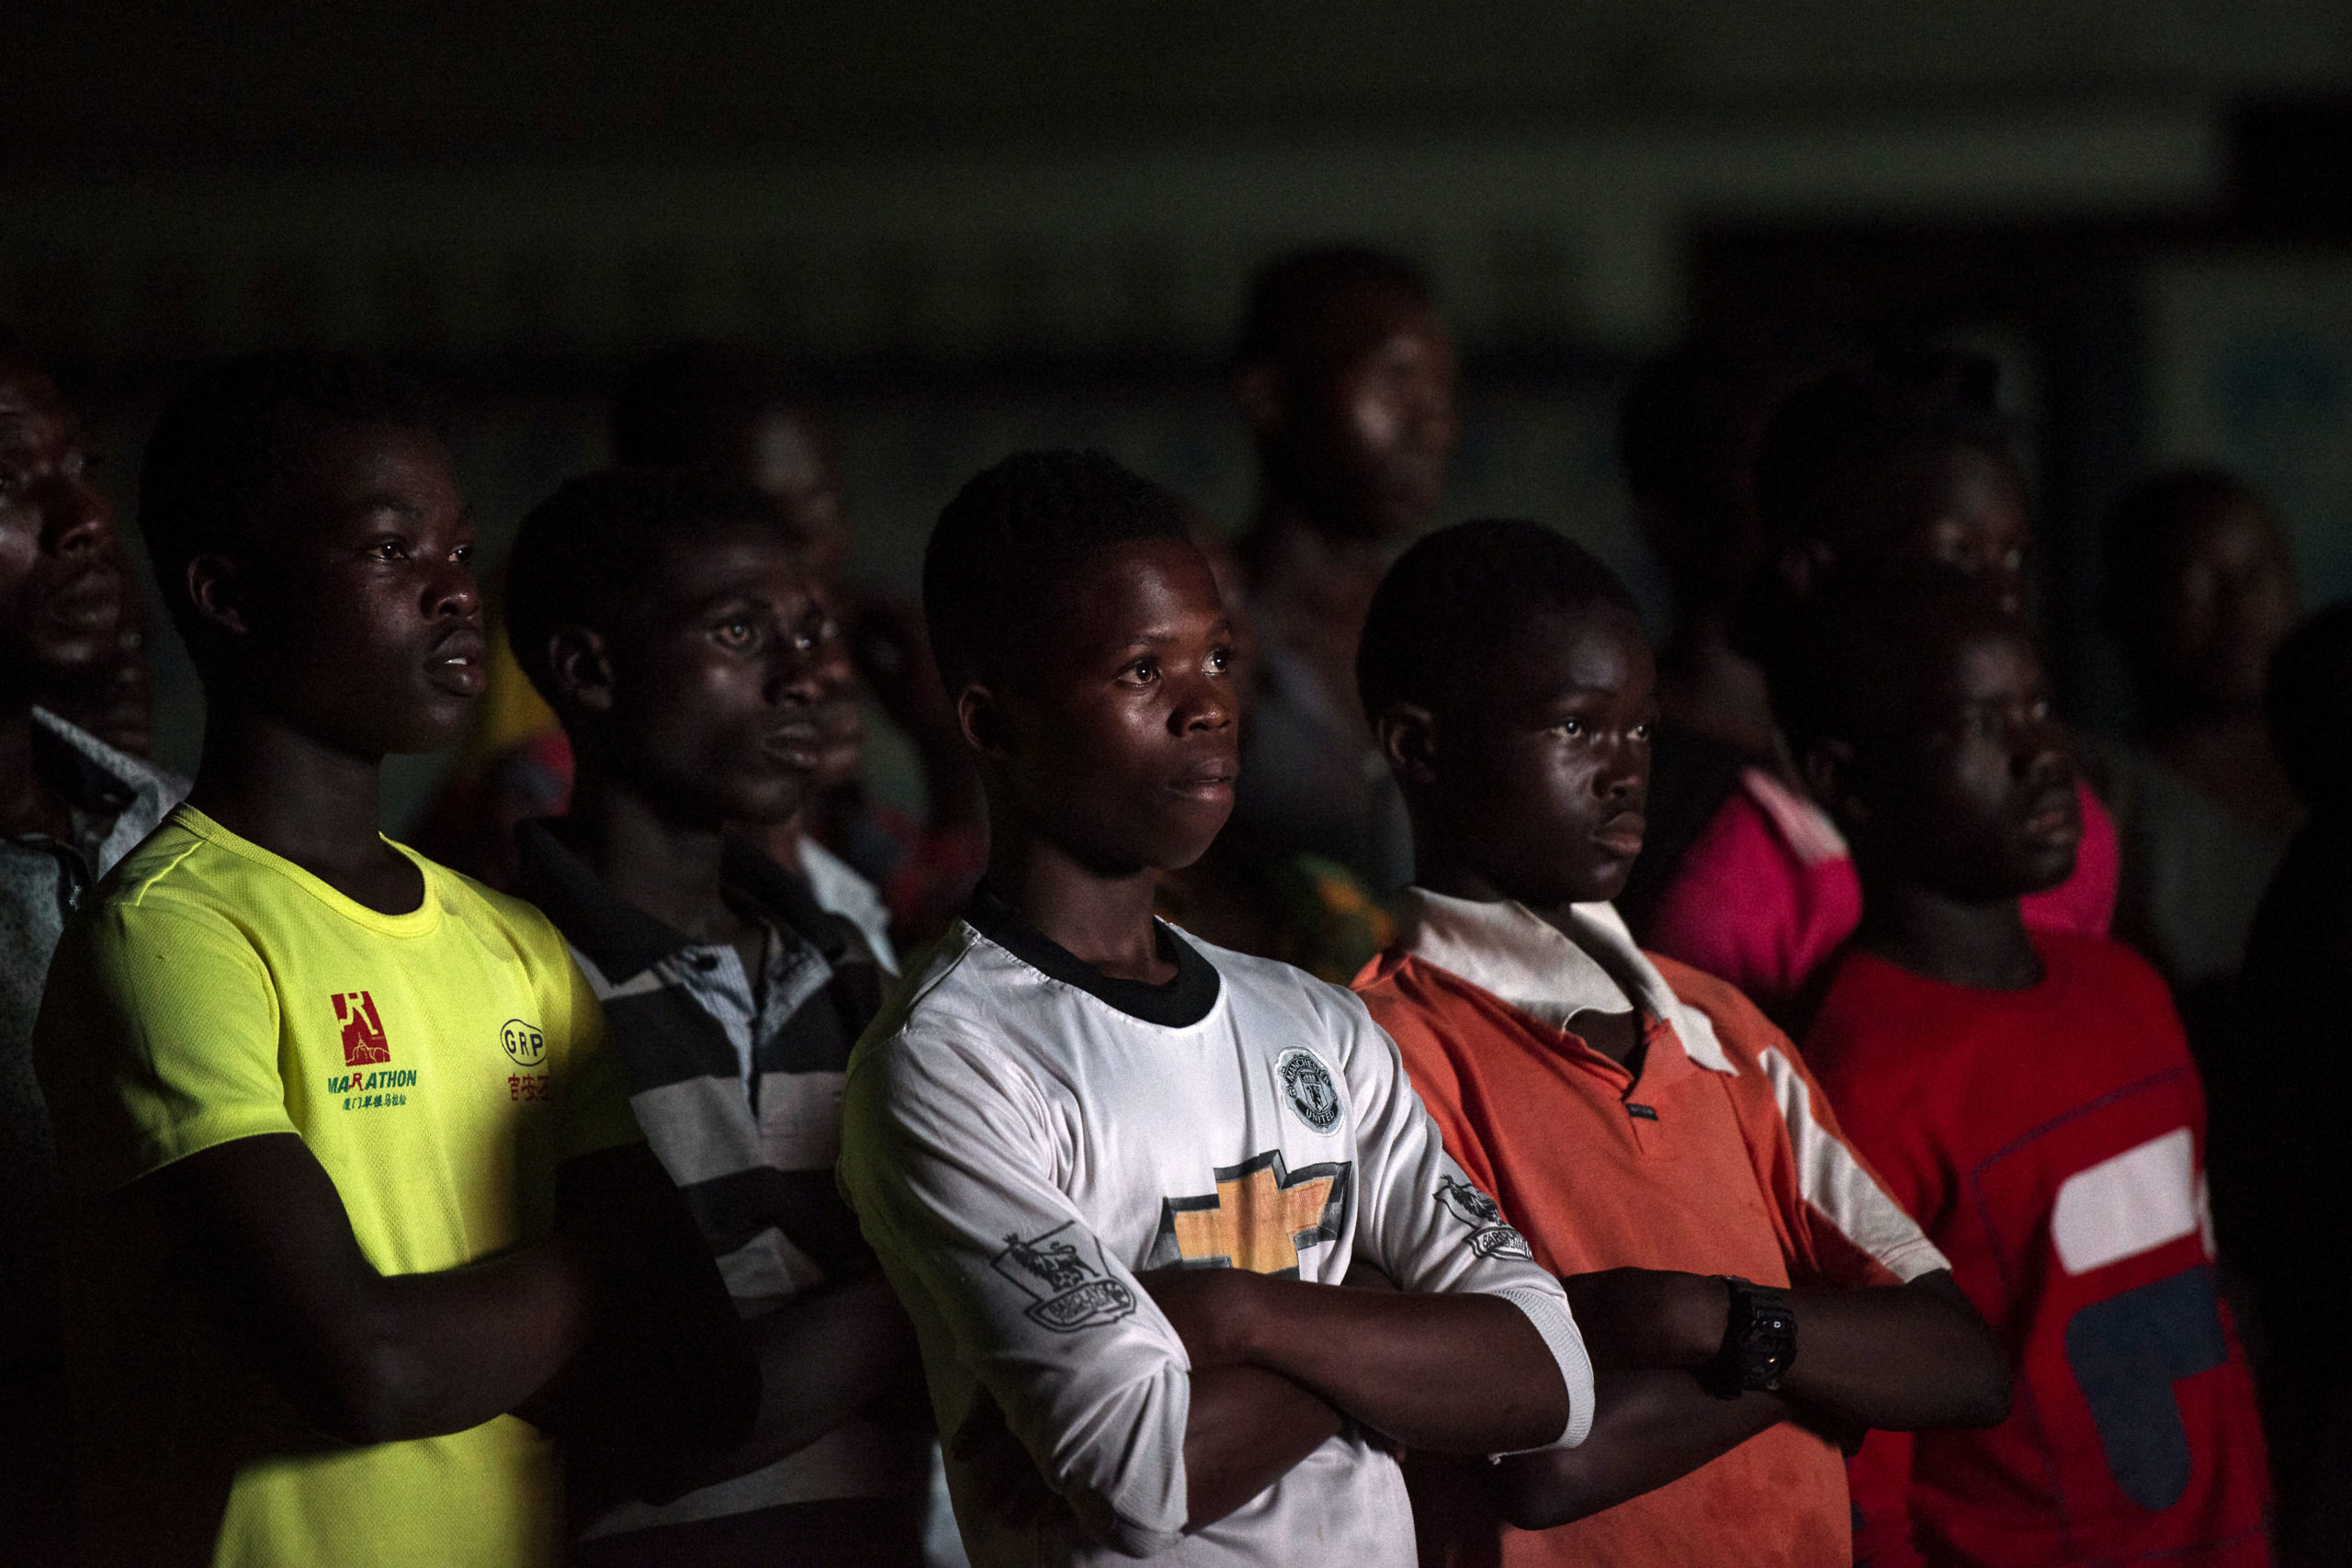 Against a dark background, a group of young boys with soccer jerseys on stand with their arms crossed as that watch a film out of the frame